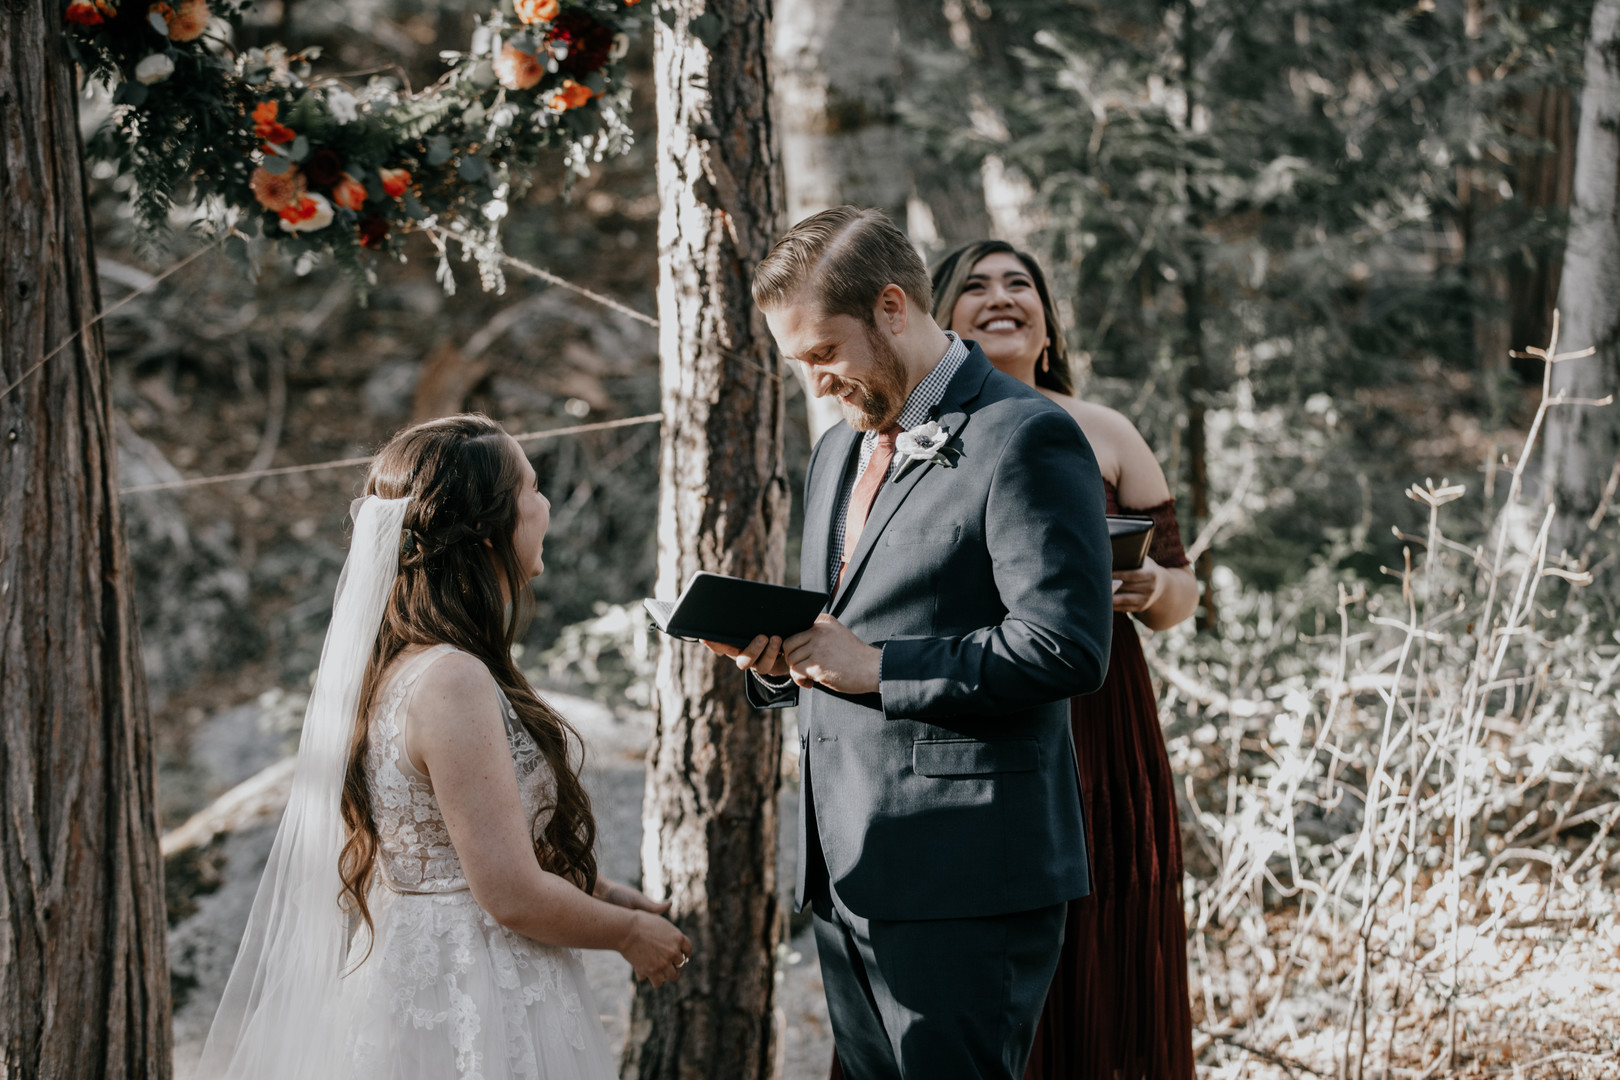 Vows | Intimate Rustic Forest Wedding